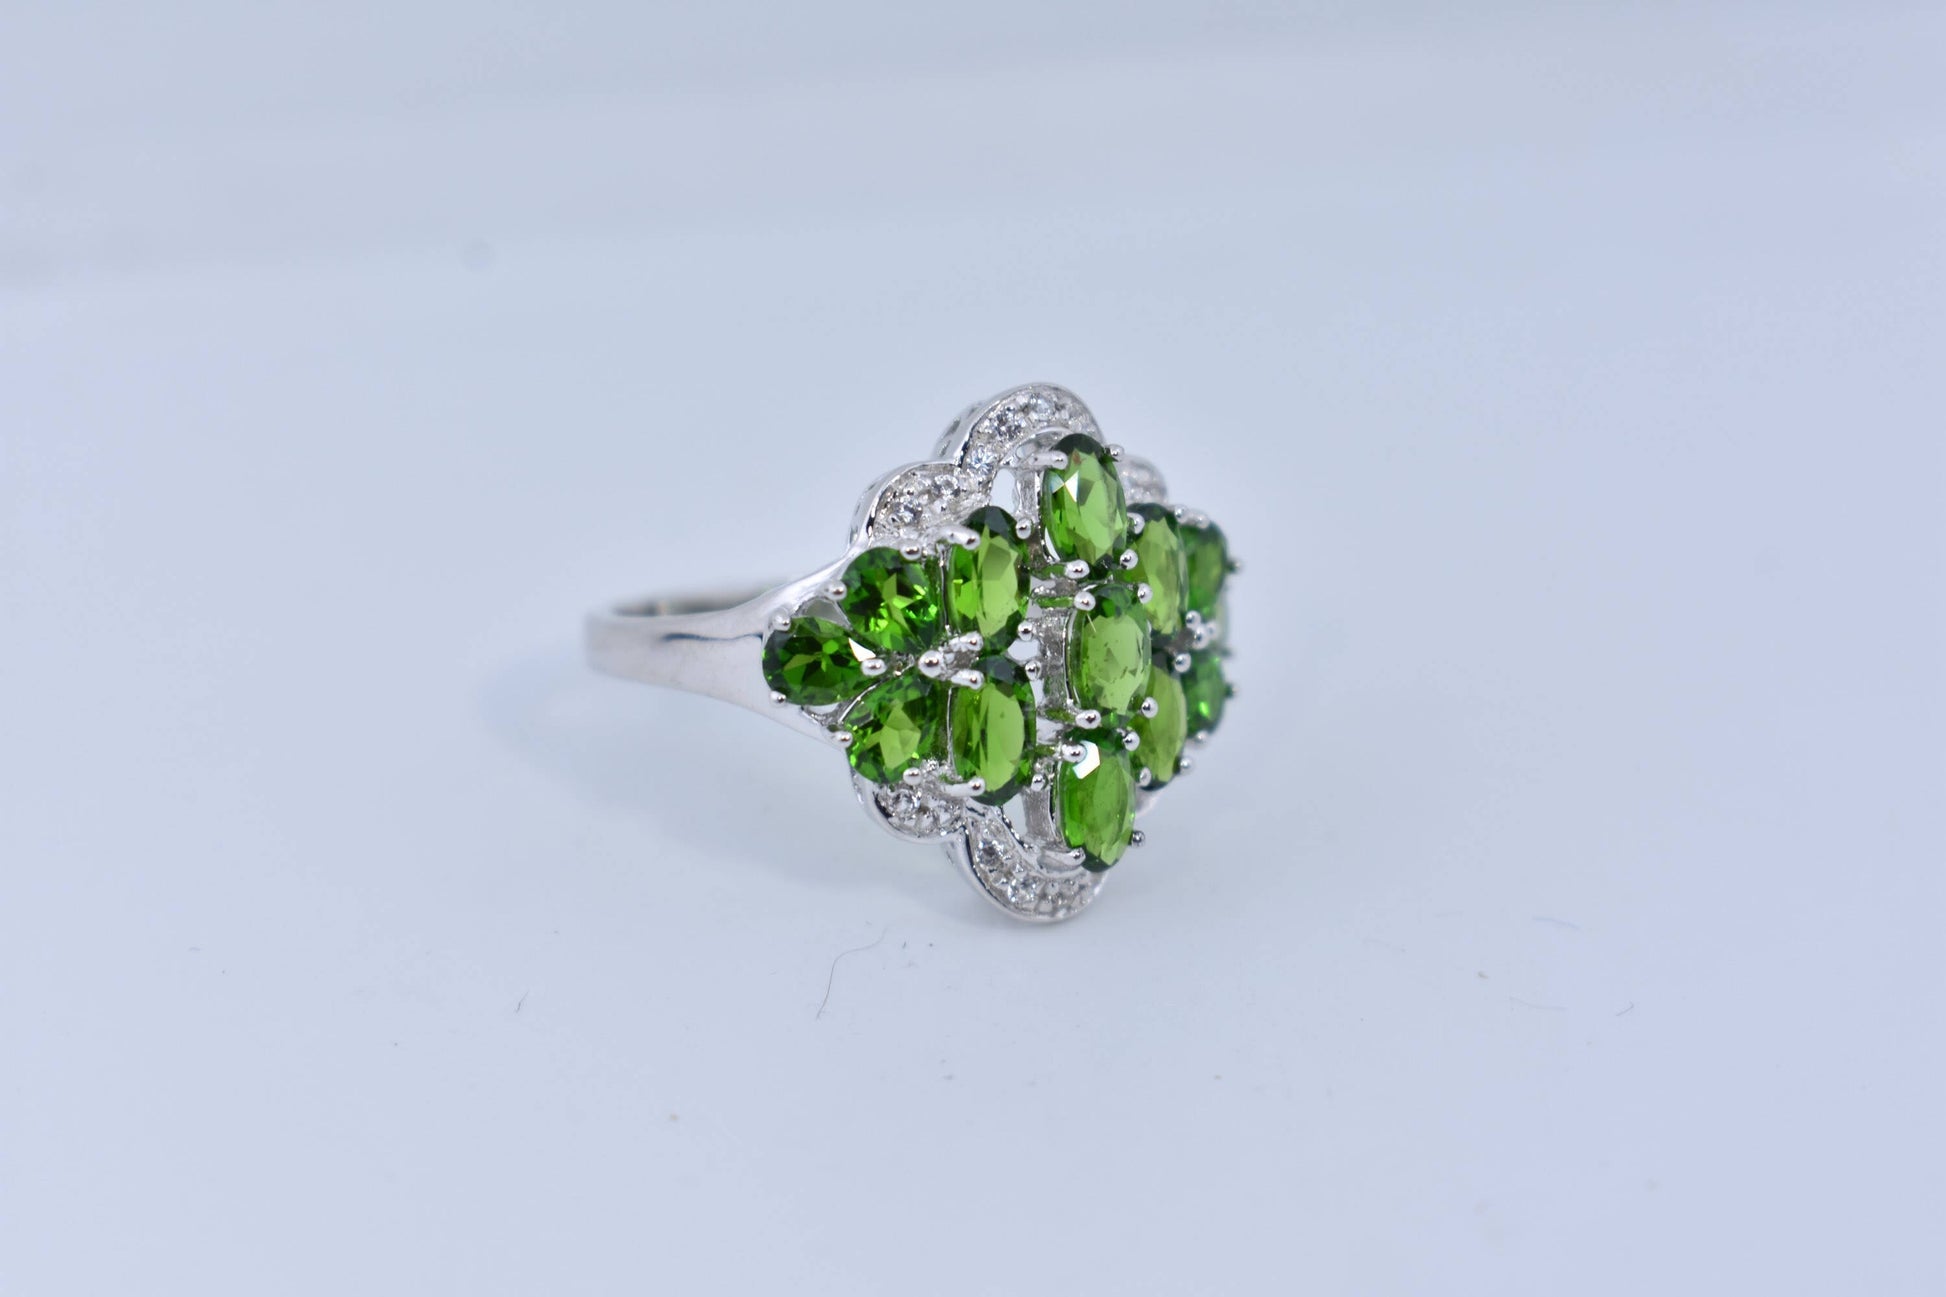 Vintage Handmade Genuine Green Chrome Diopside Setting 925 Sterling Silver Gothic Ring